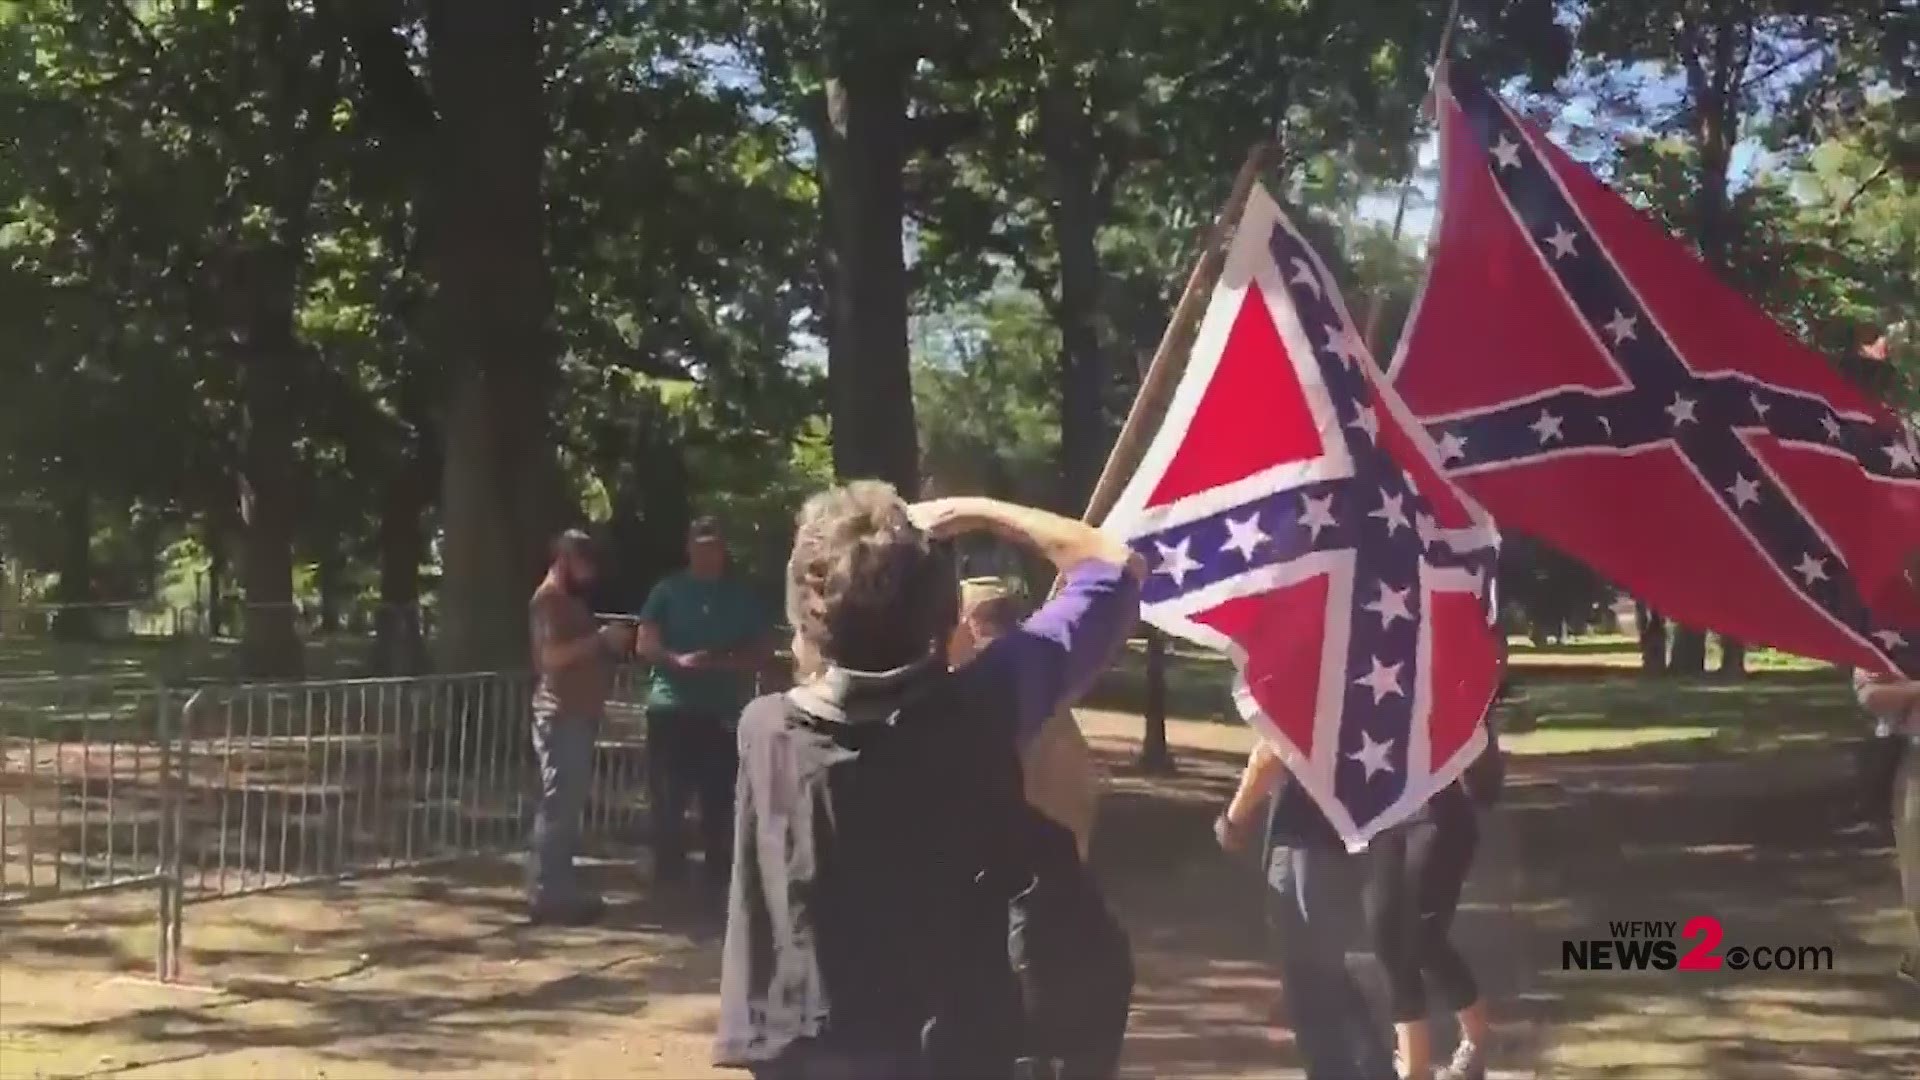 Supporters and opponents rally at Silent Sam statue site in Chapel Hill.